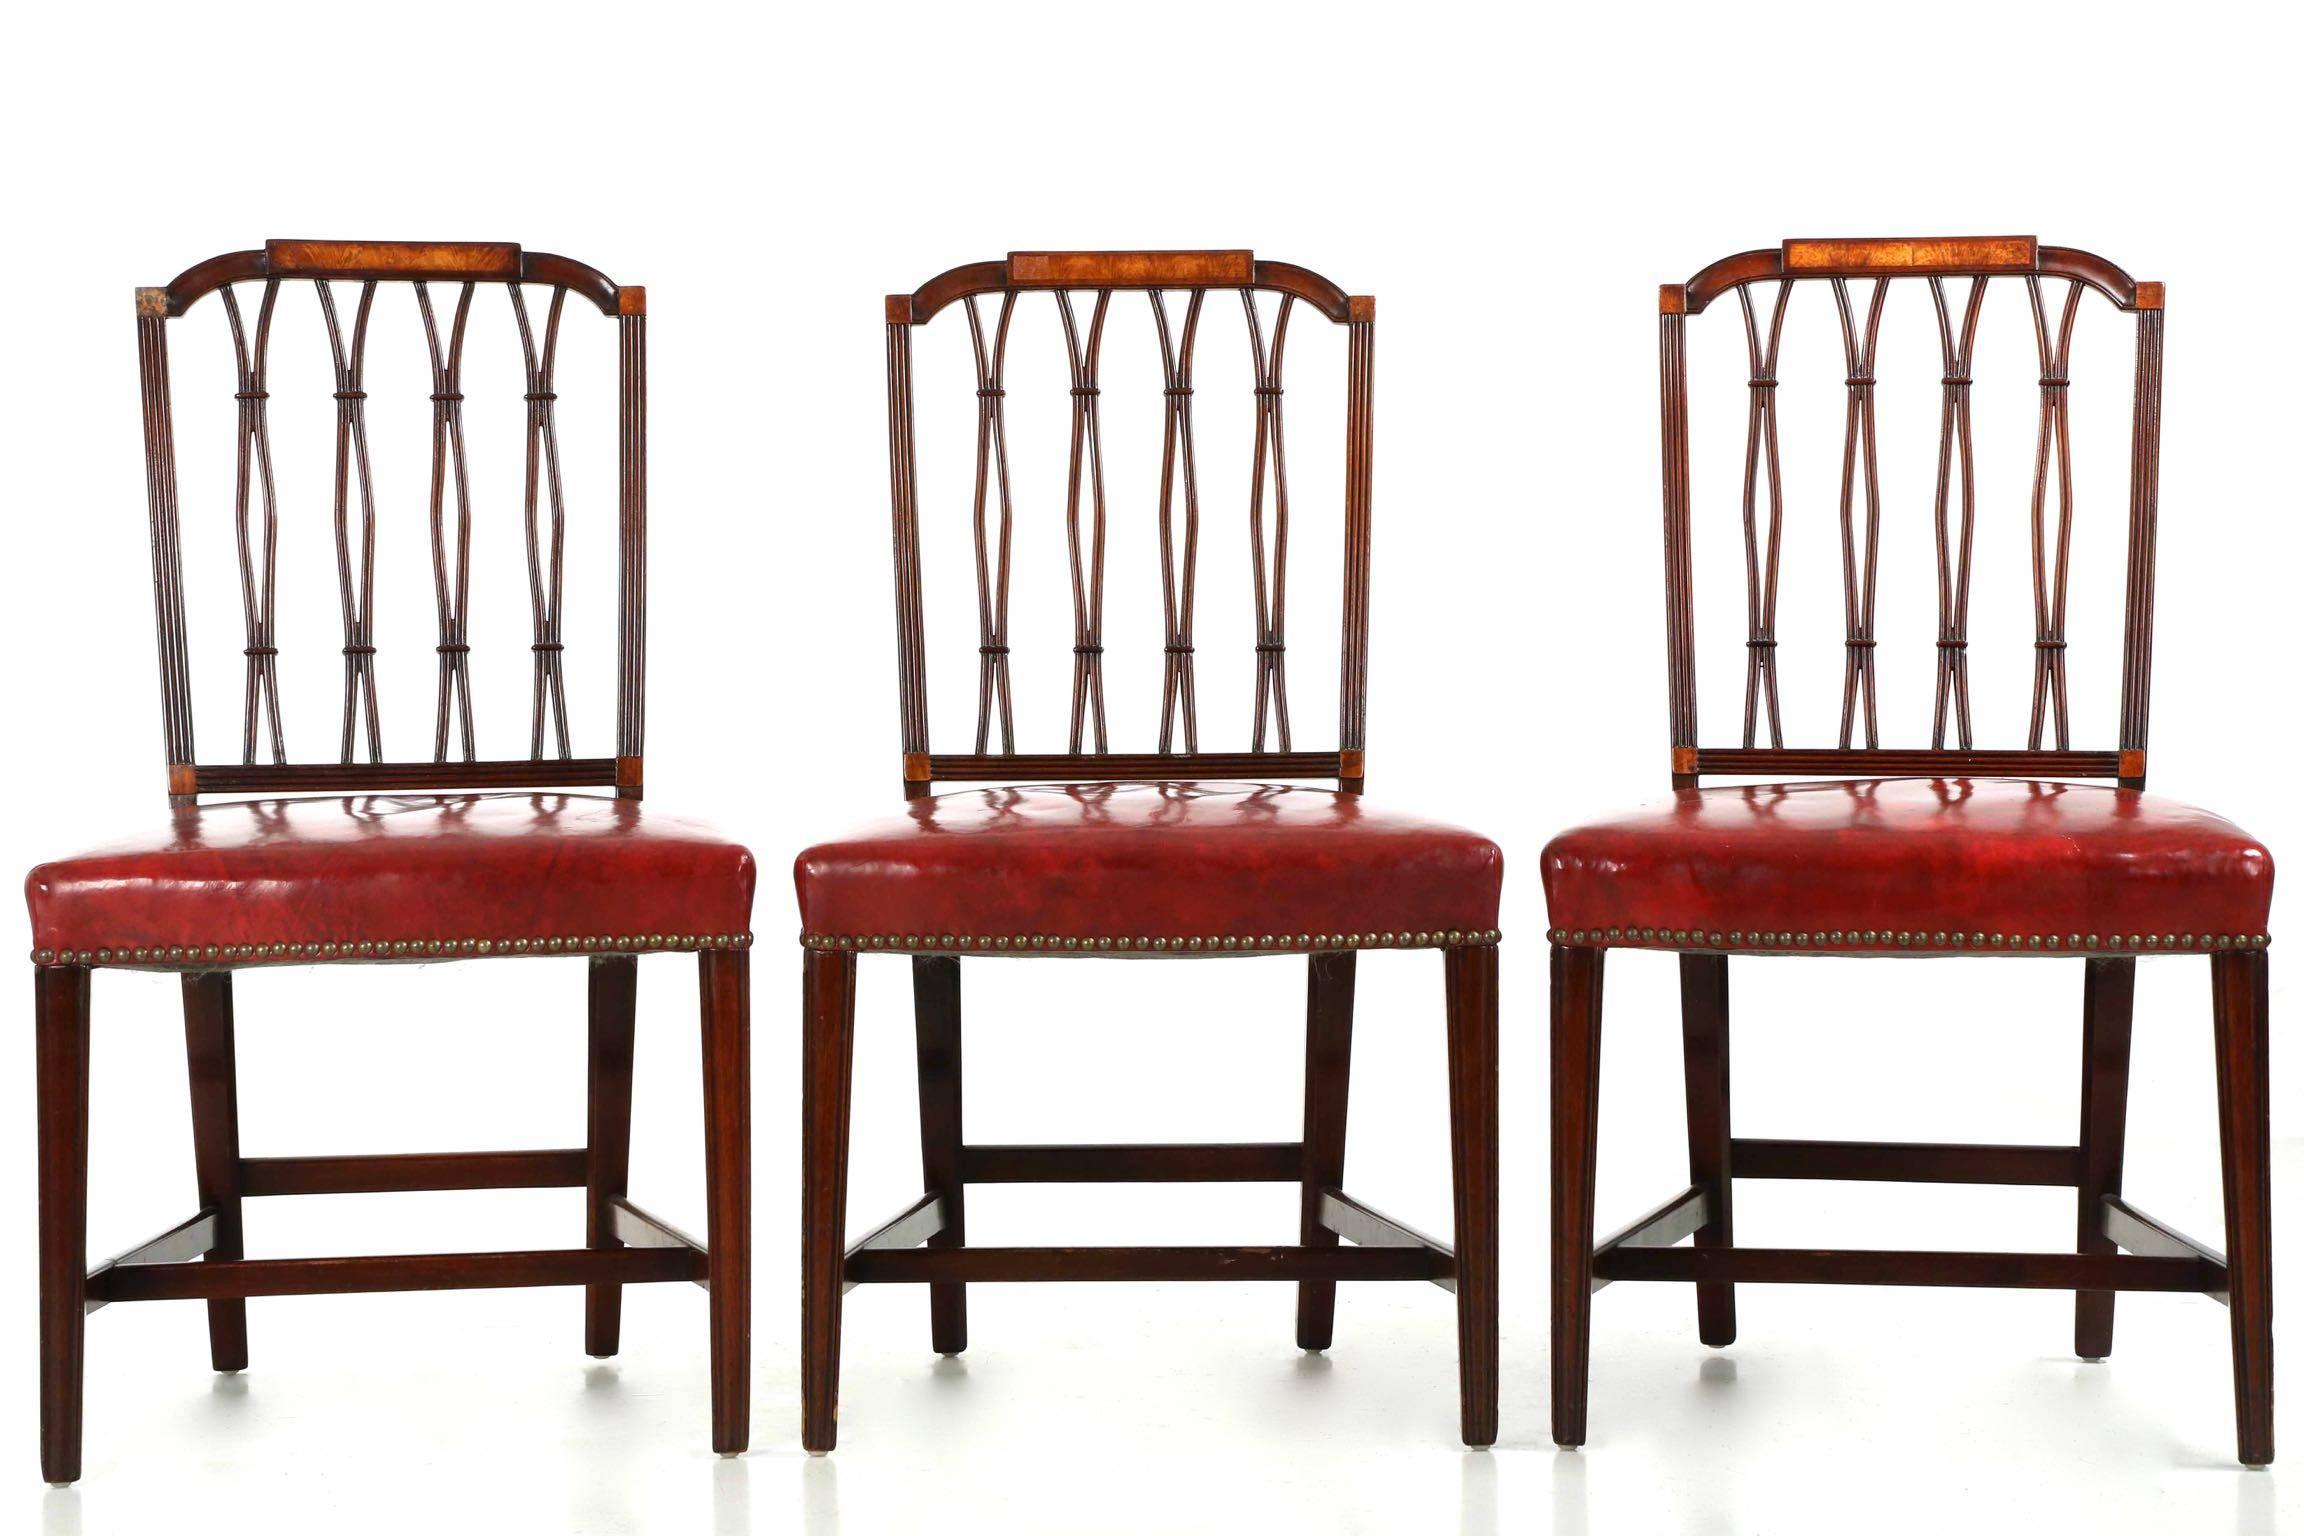 Late 19th Century Set of Eight American Federal Style Mahogany and Birch Dining Chairs